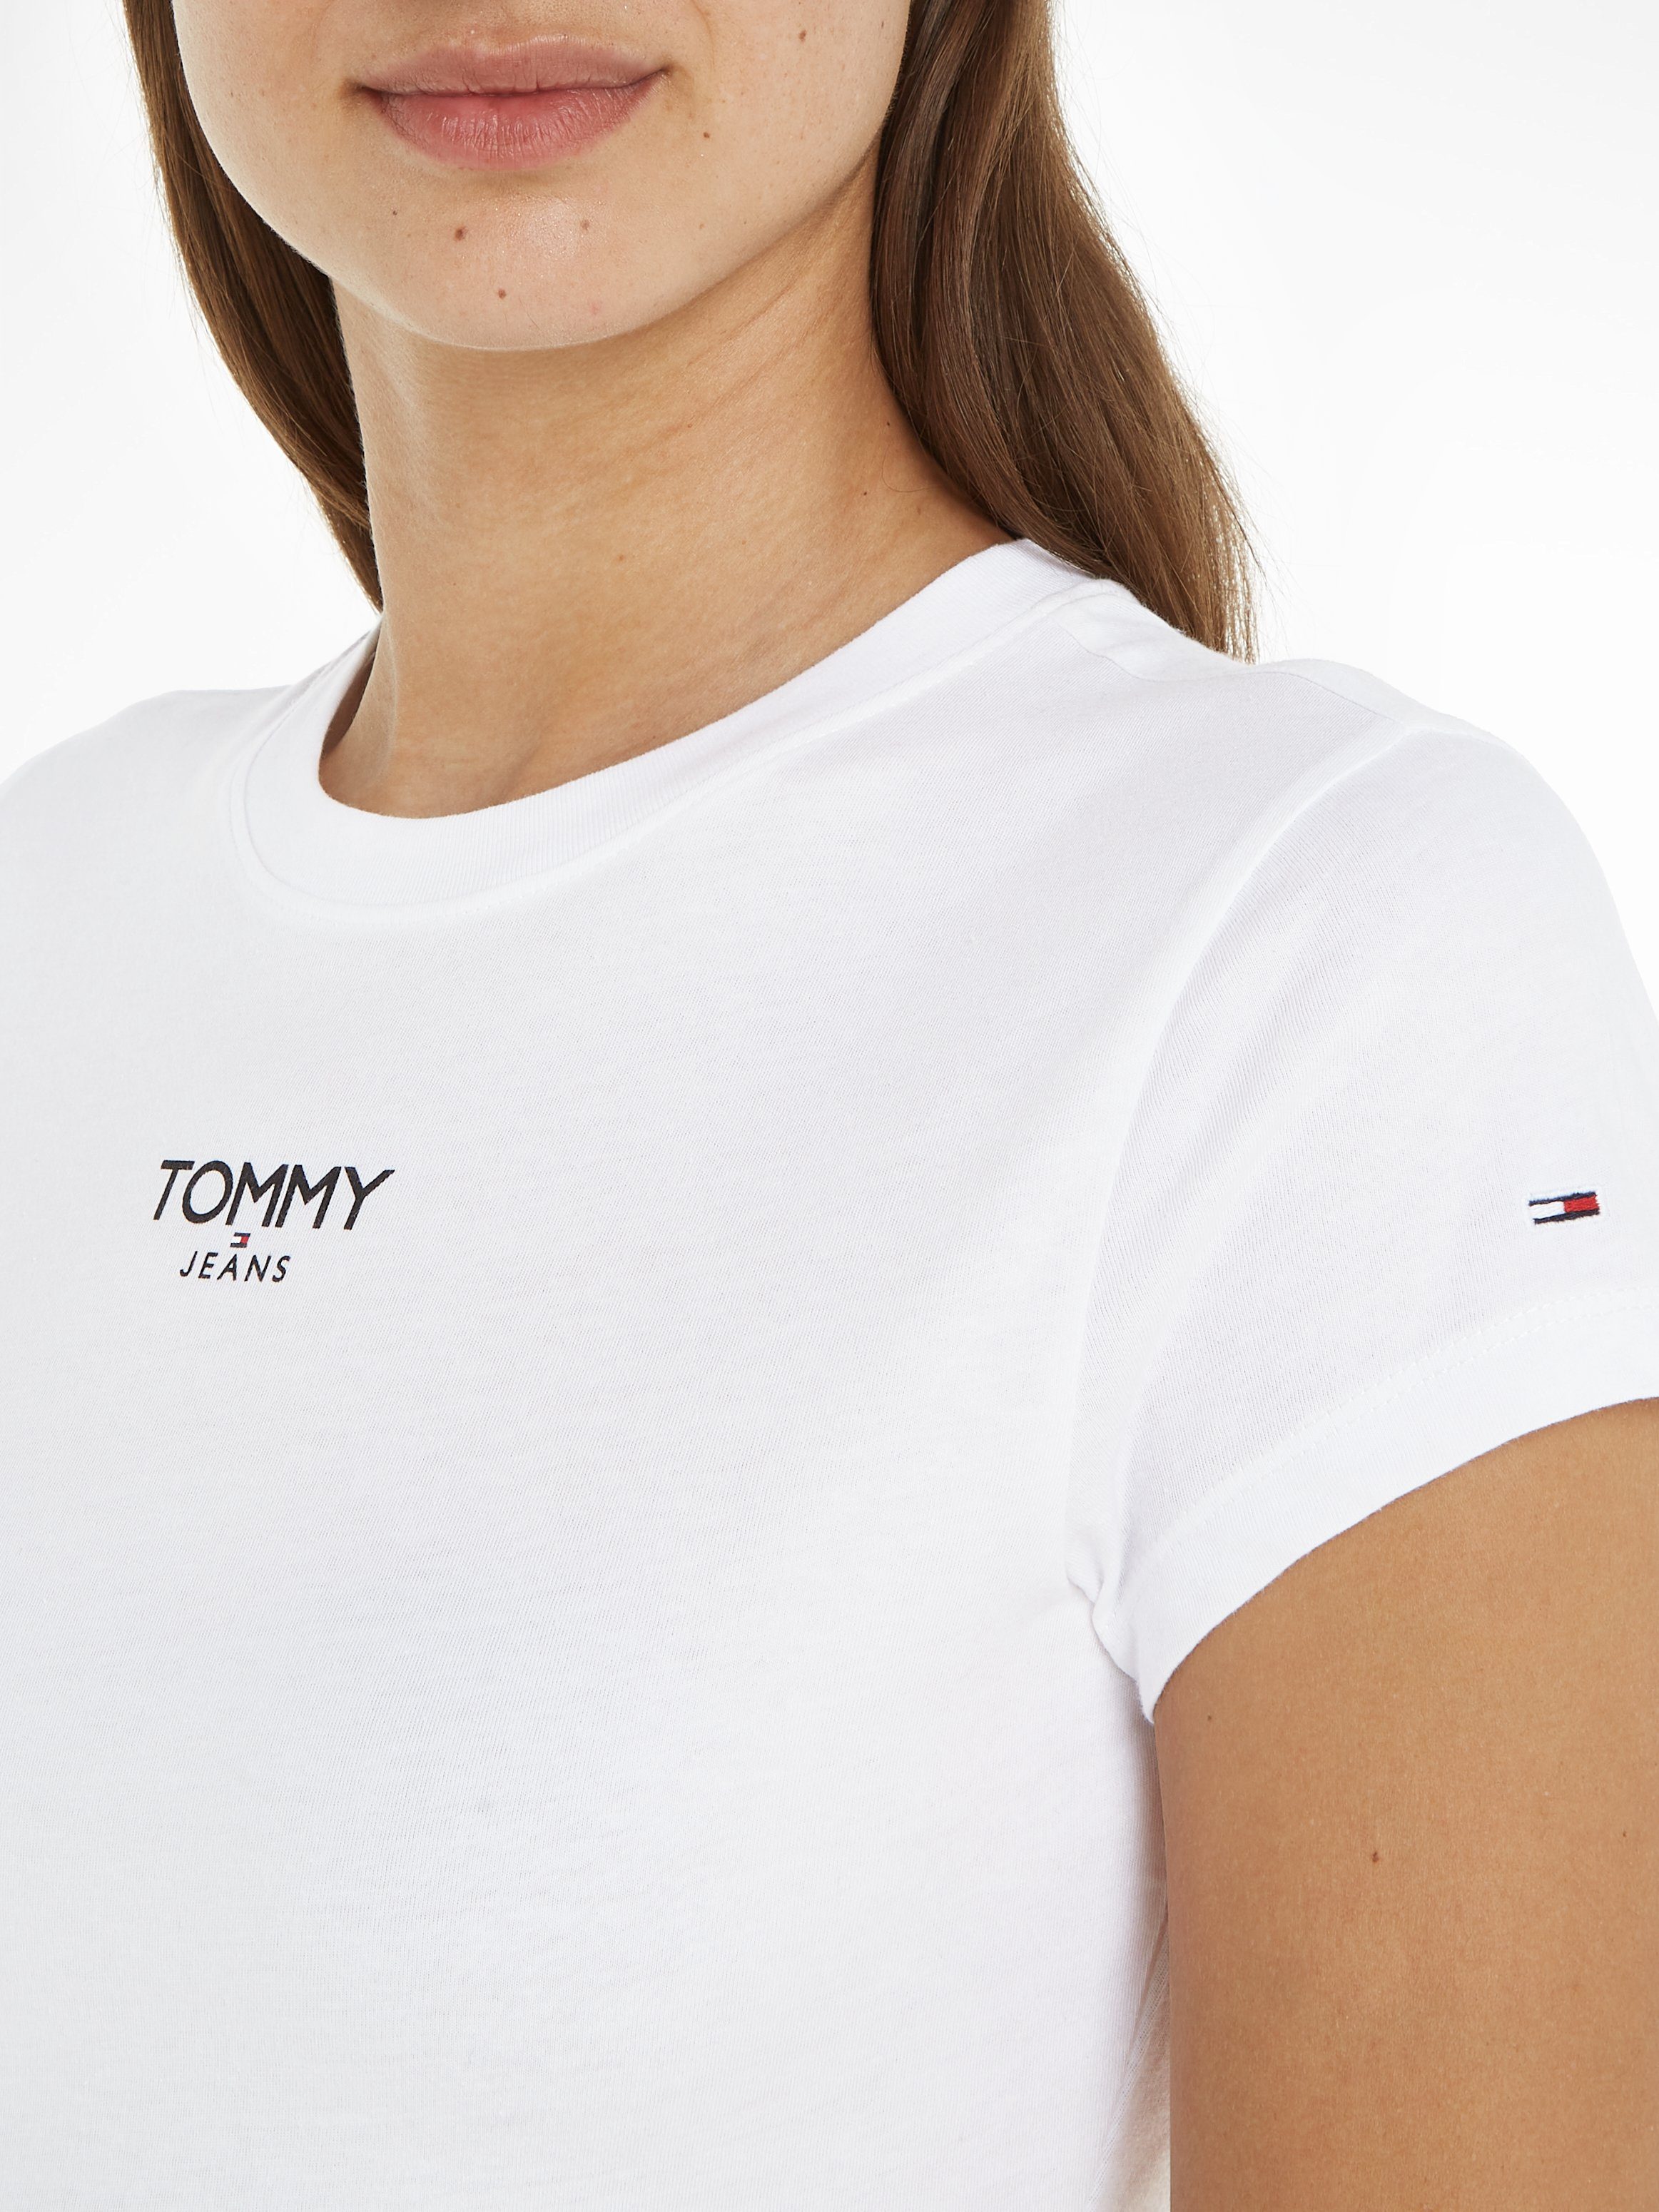 Tommy Jeans T-Shirt TJW BBY ESSENTIAL White Tommy Jeans 1 SS mit Logo LOGO